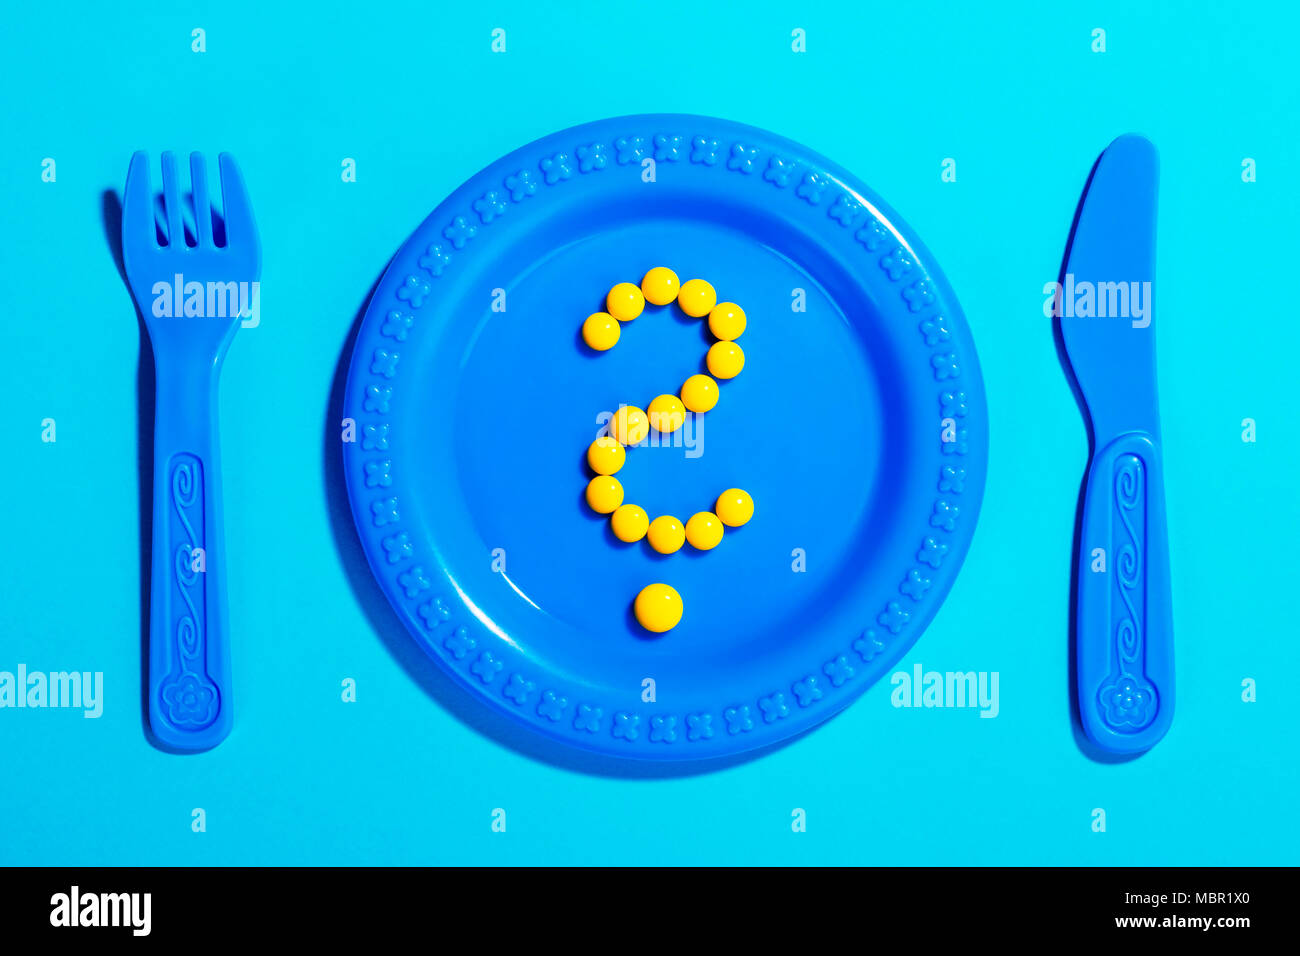 Question mark created from yellow pills on children’s plate and cutlery toy. Medical concept. Stock Photo